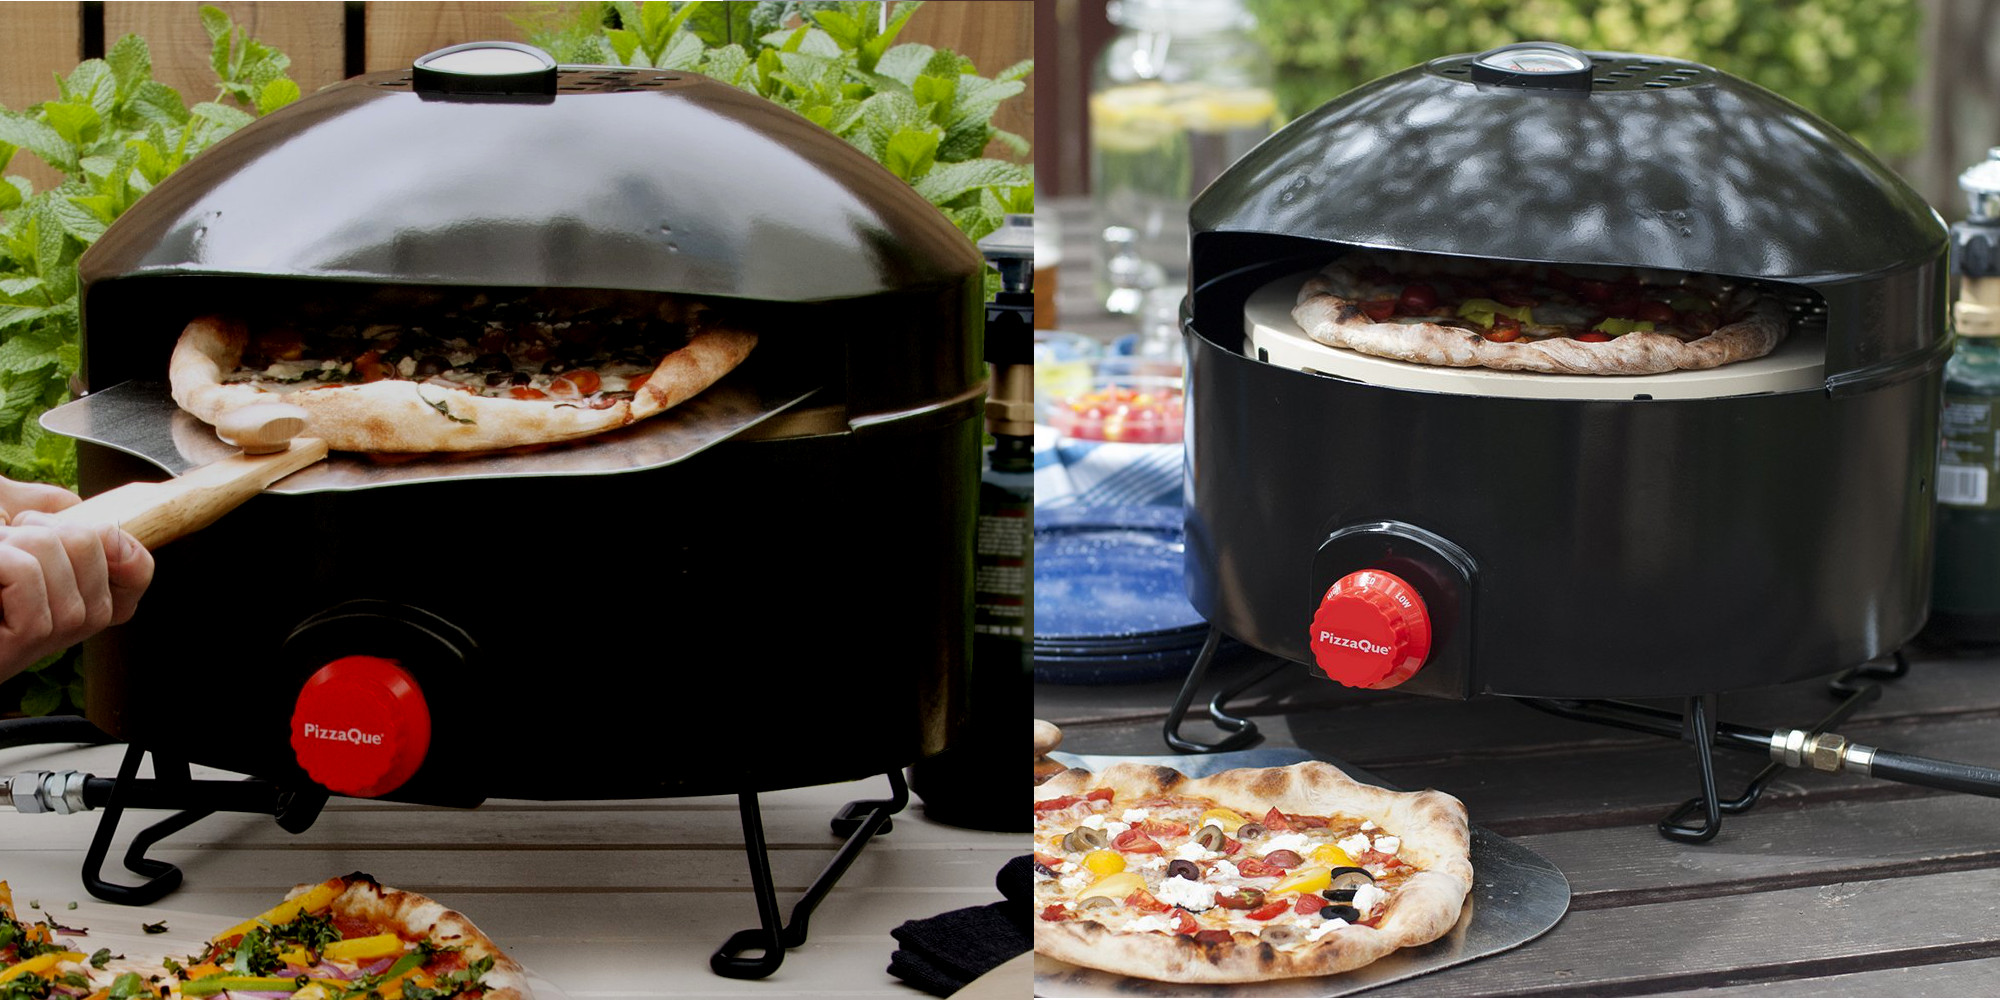 PizzaQue Outdoor Pizza Oven Propane Fueled & Portable for Camping BESTSELLER 